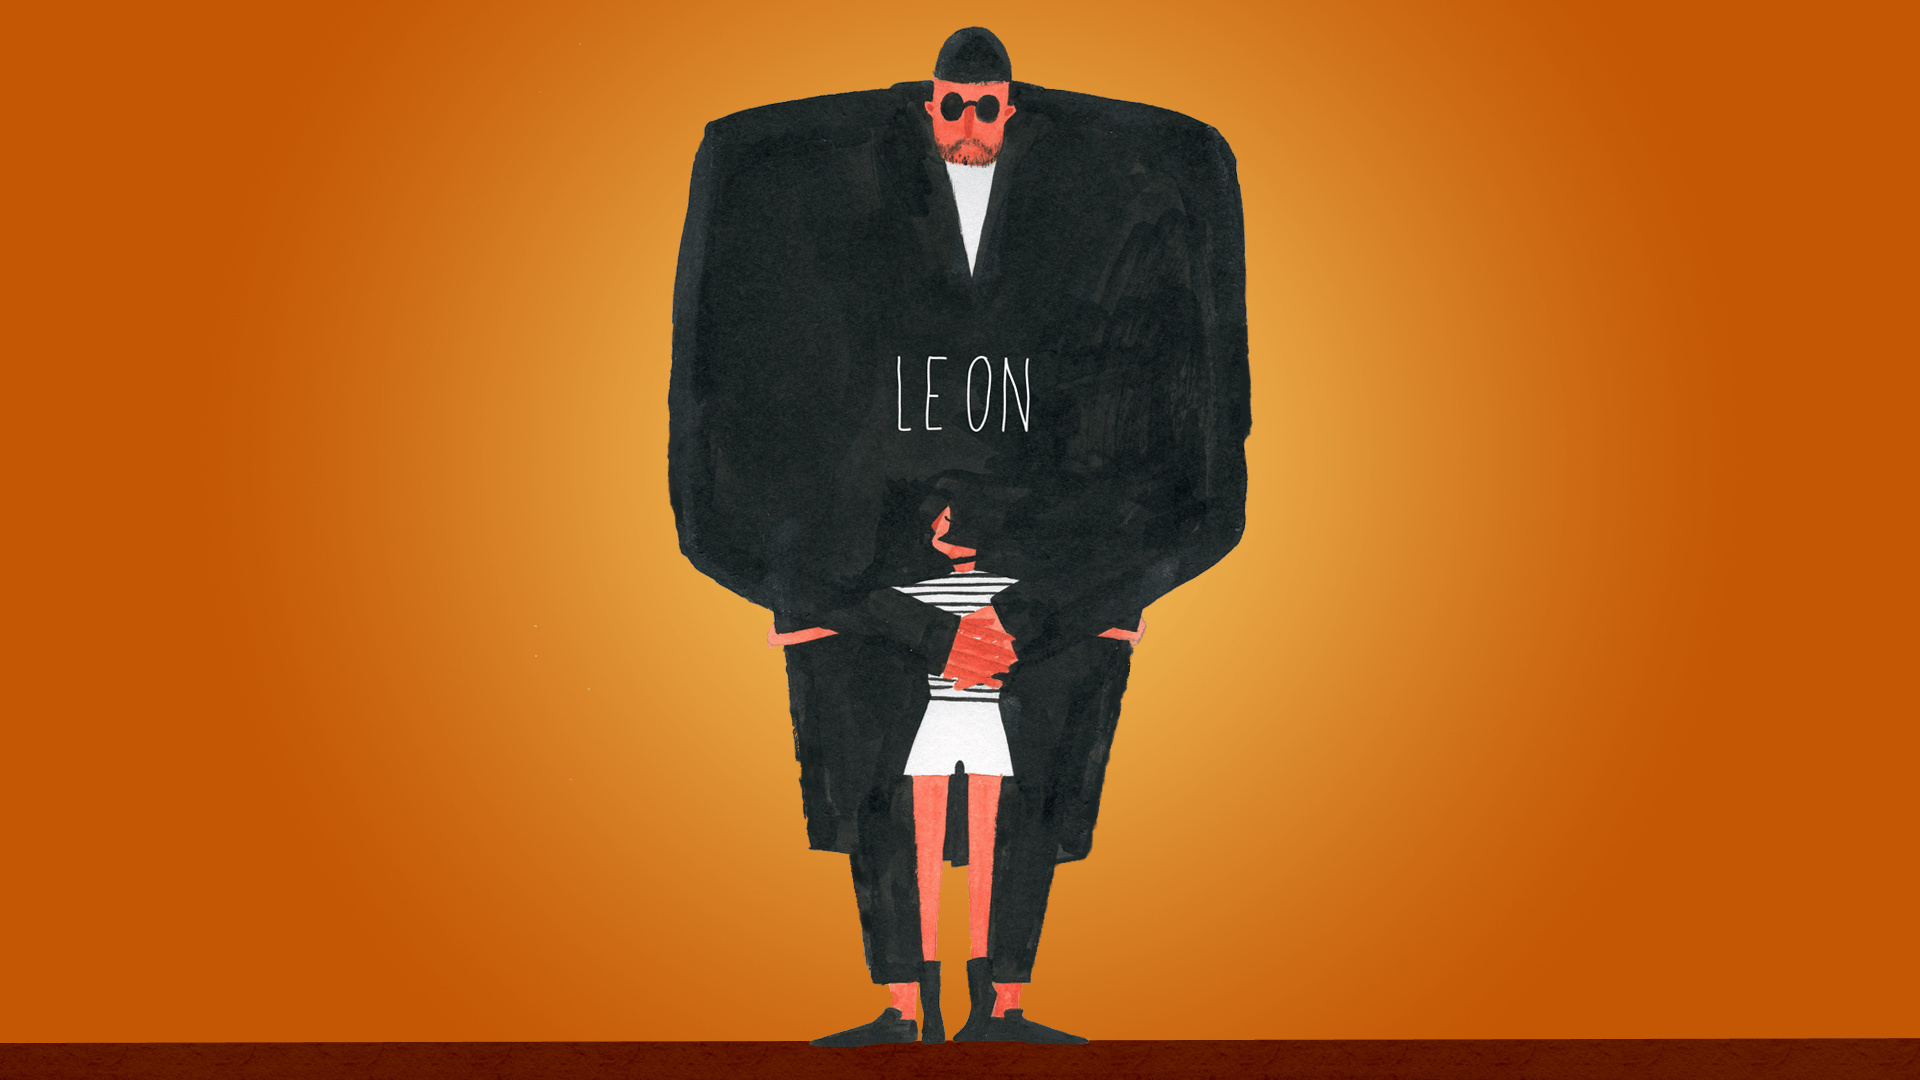 Leon: The Professional, A 1994 English-language French action crime thriller film. 1920x1080 Full HD Wallpaper.